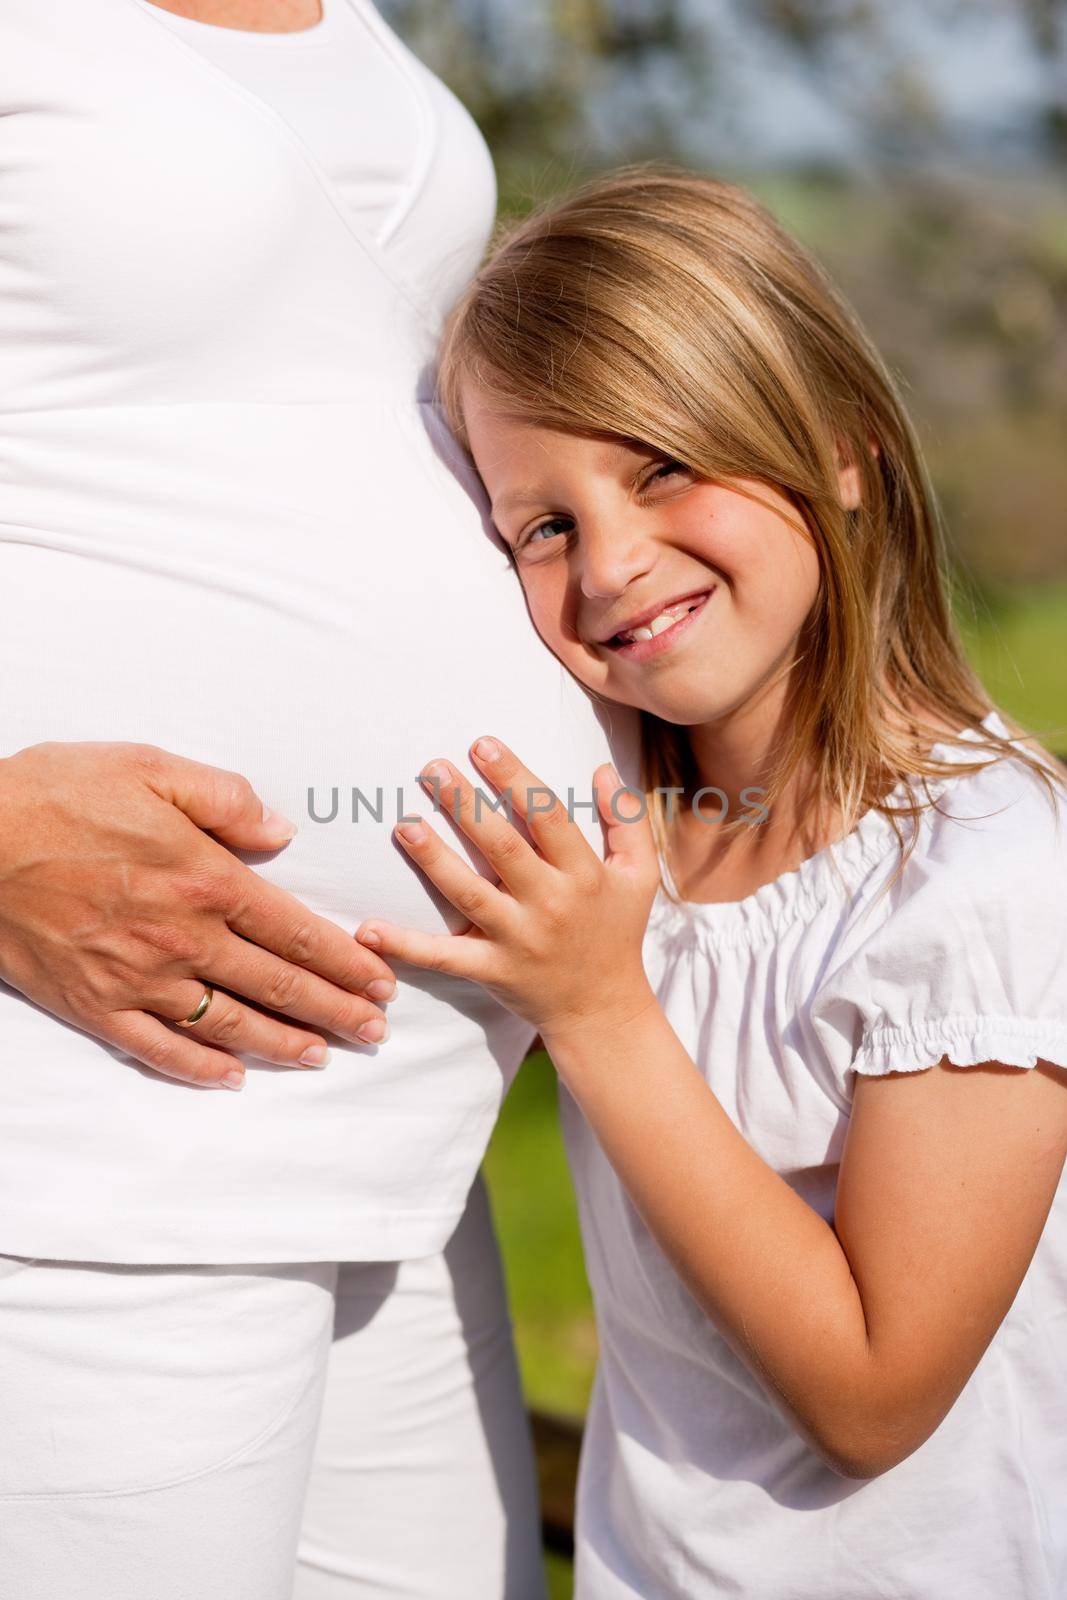 Family affairs - Girl is touching round belly of her pregnant mother in eager anticipation of the new child